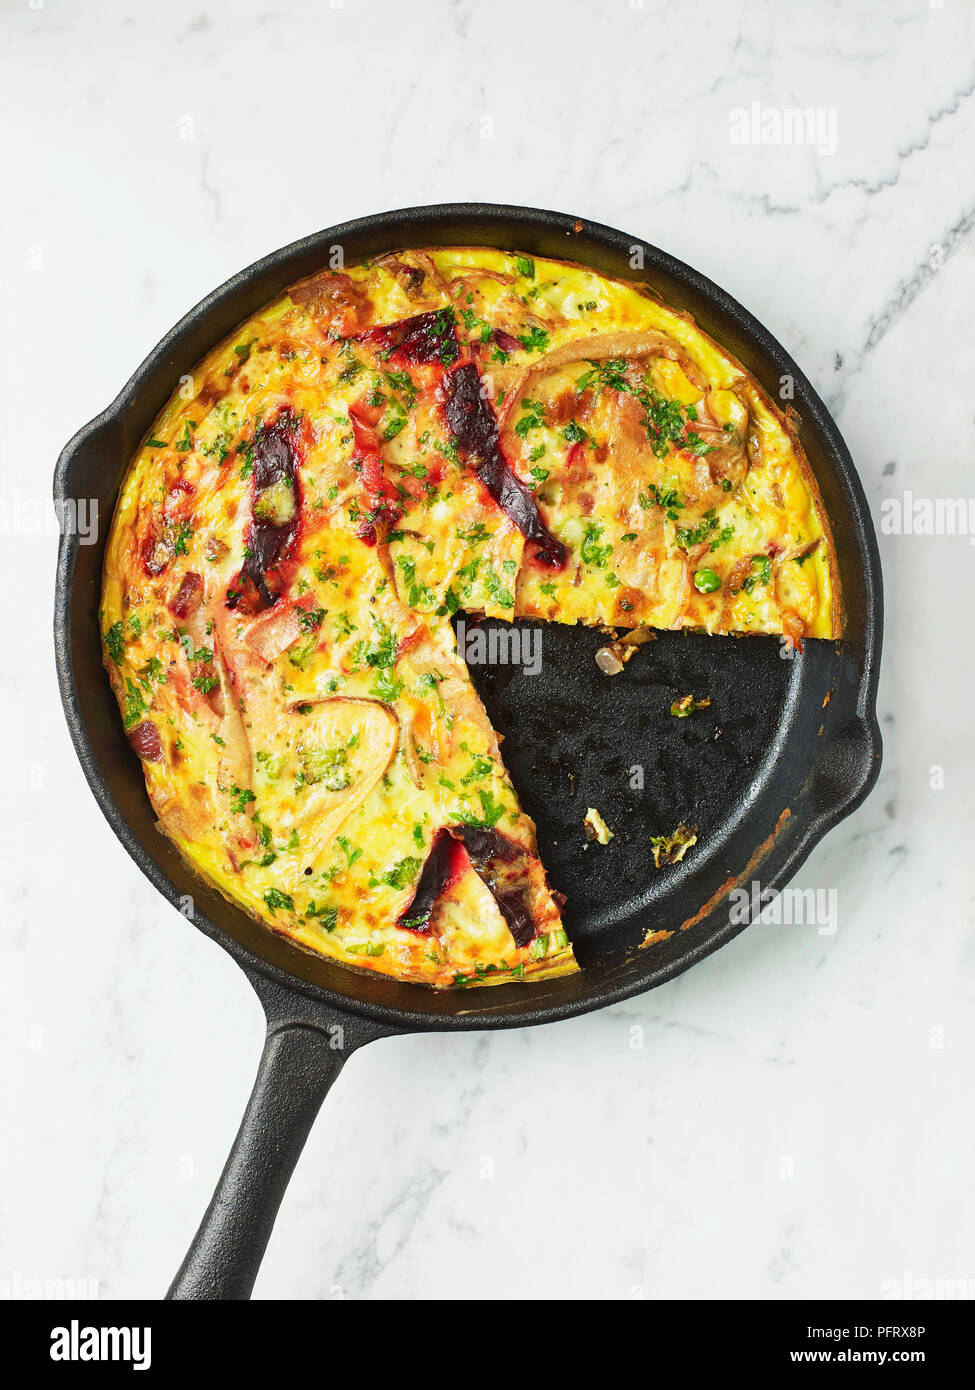 Vegetable frittata in a cast-iron pan Stock Photo